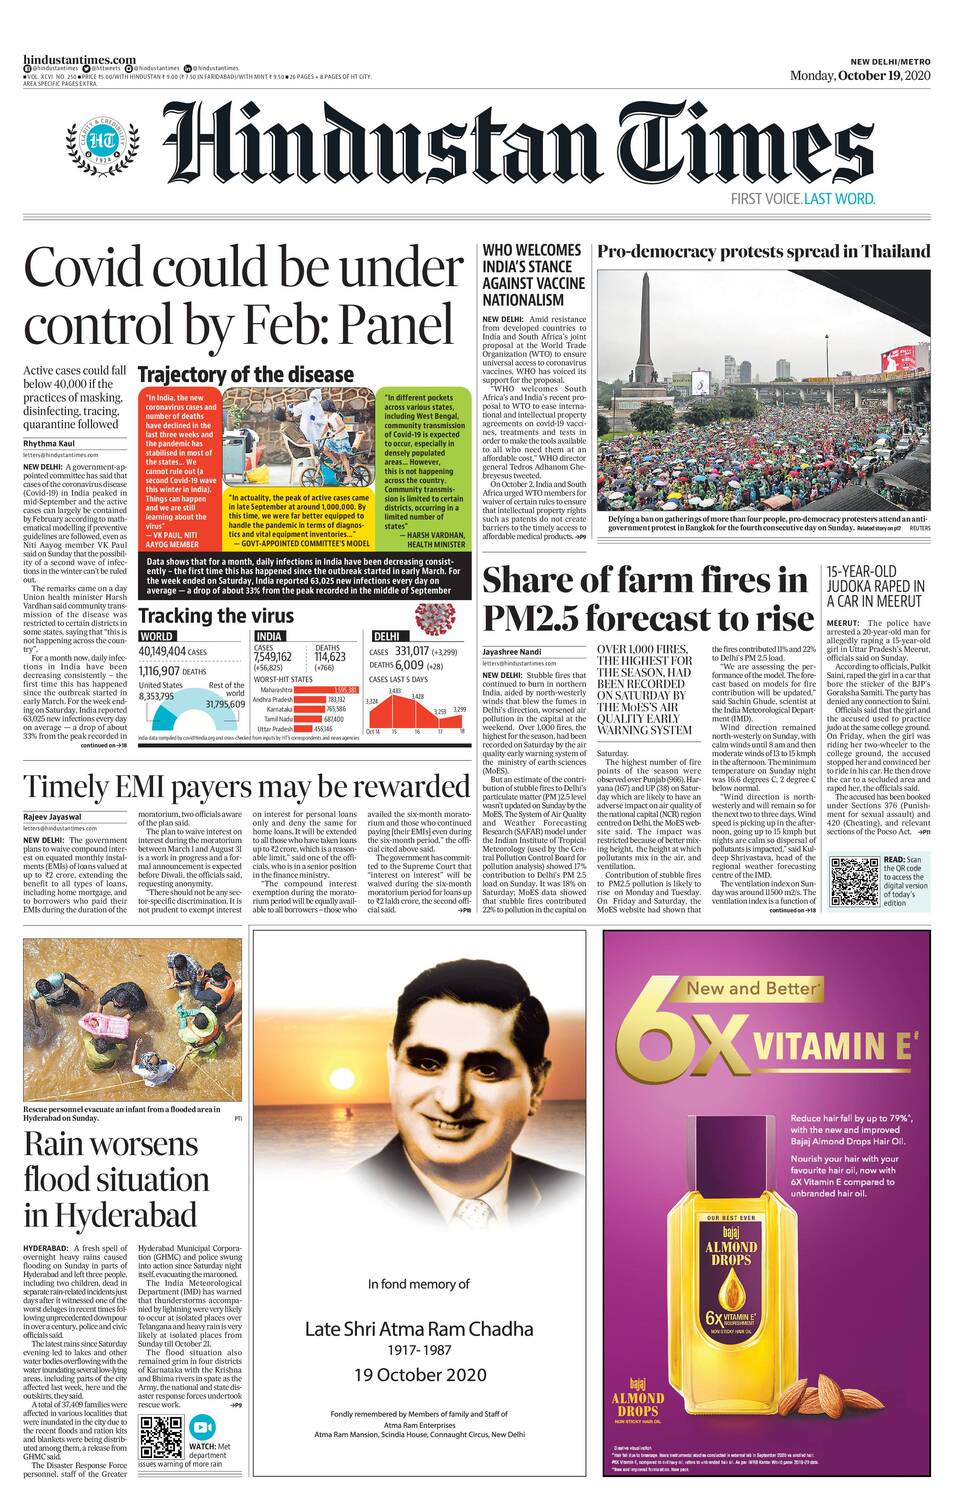 Newspaper Headlines Covid Can Be Controlled By February 21 Says Panel And Other Top Stories